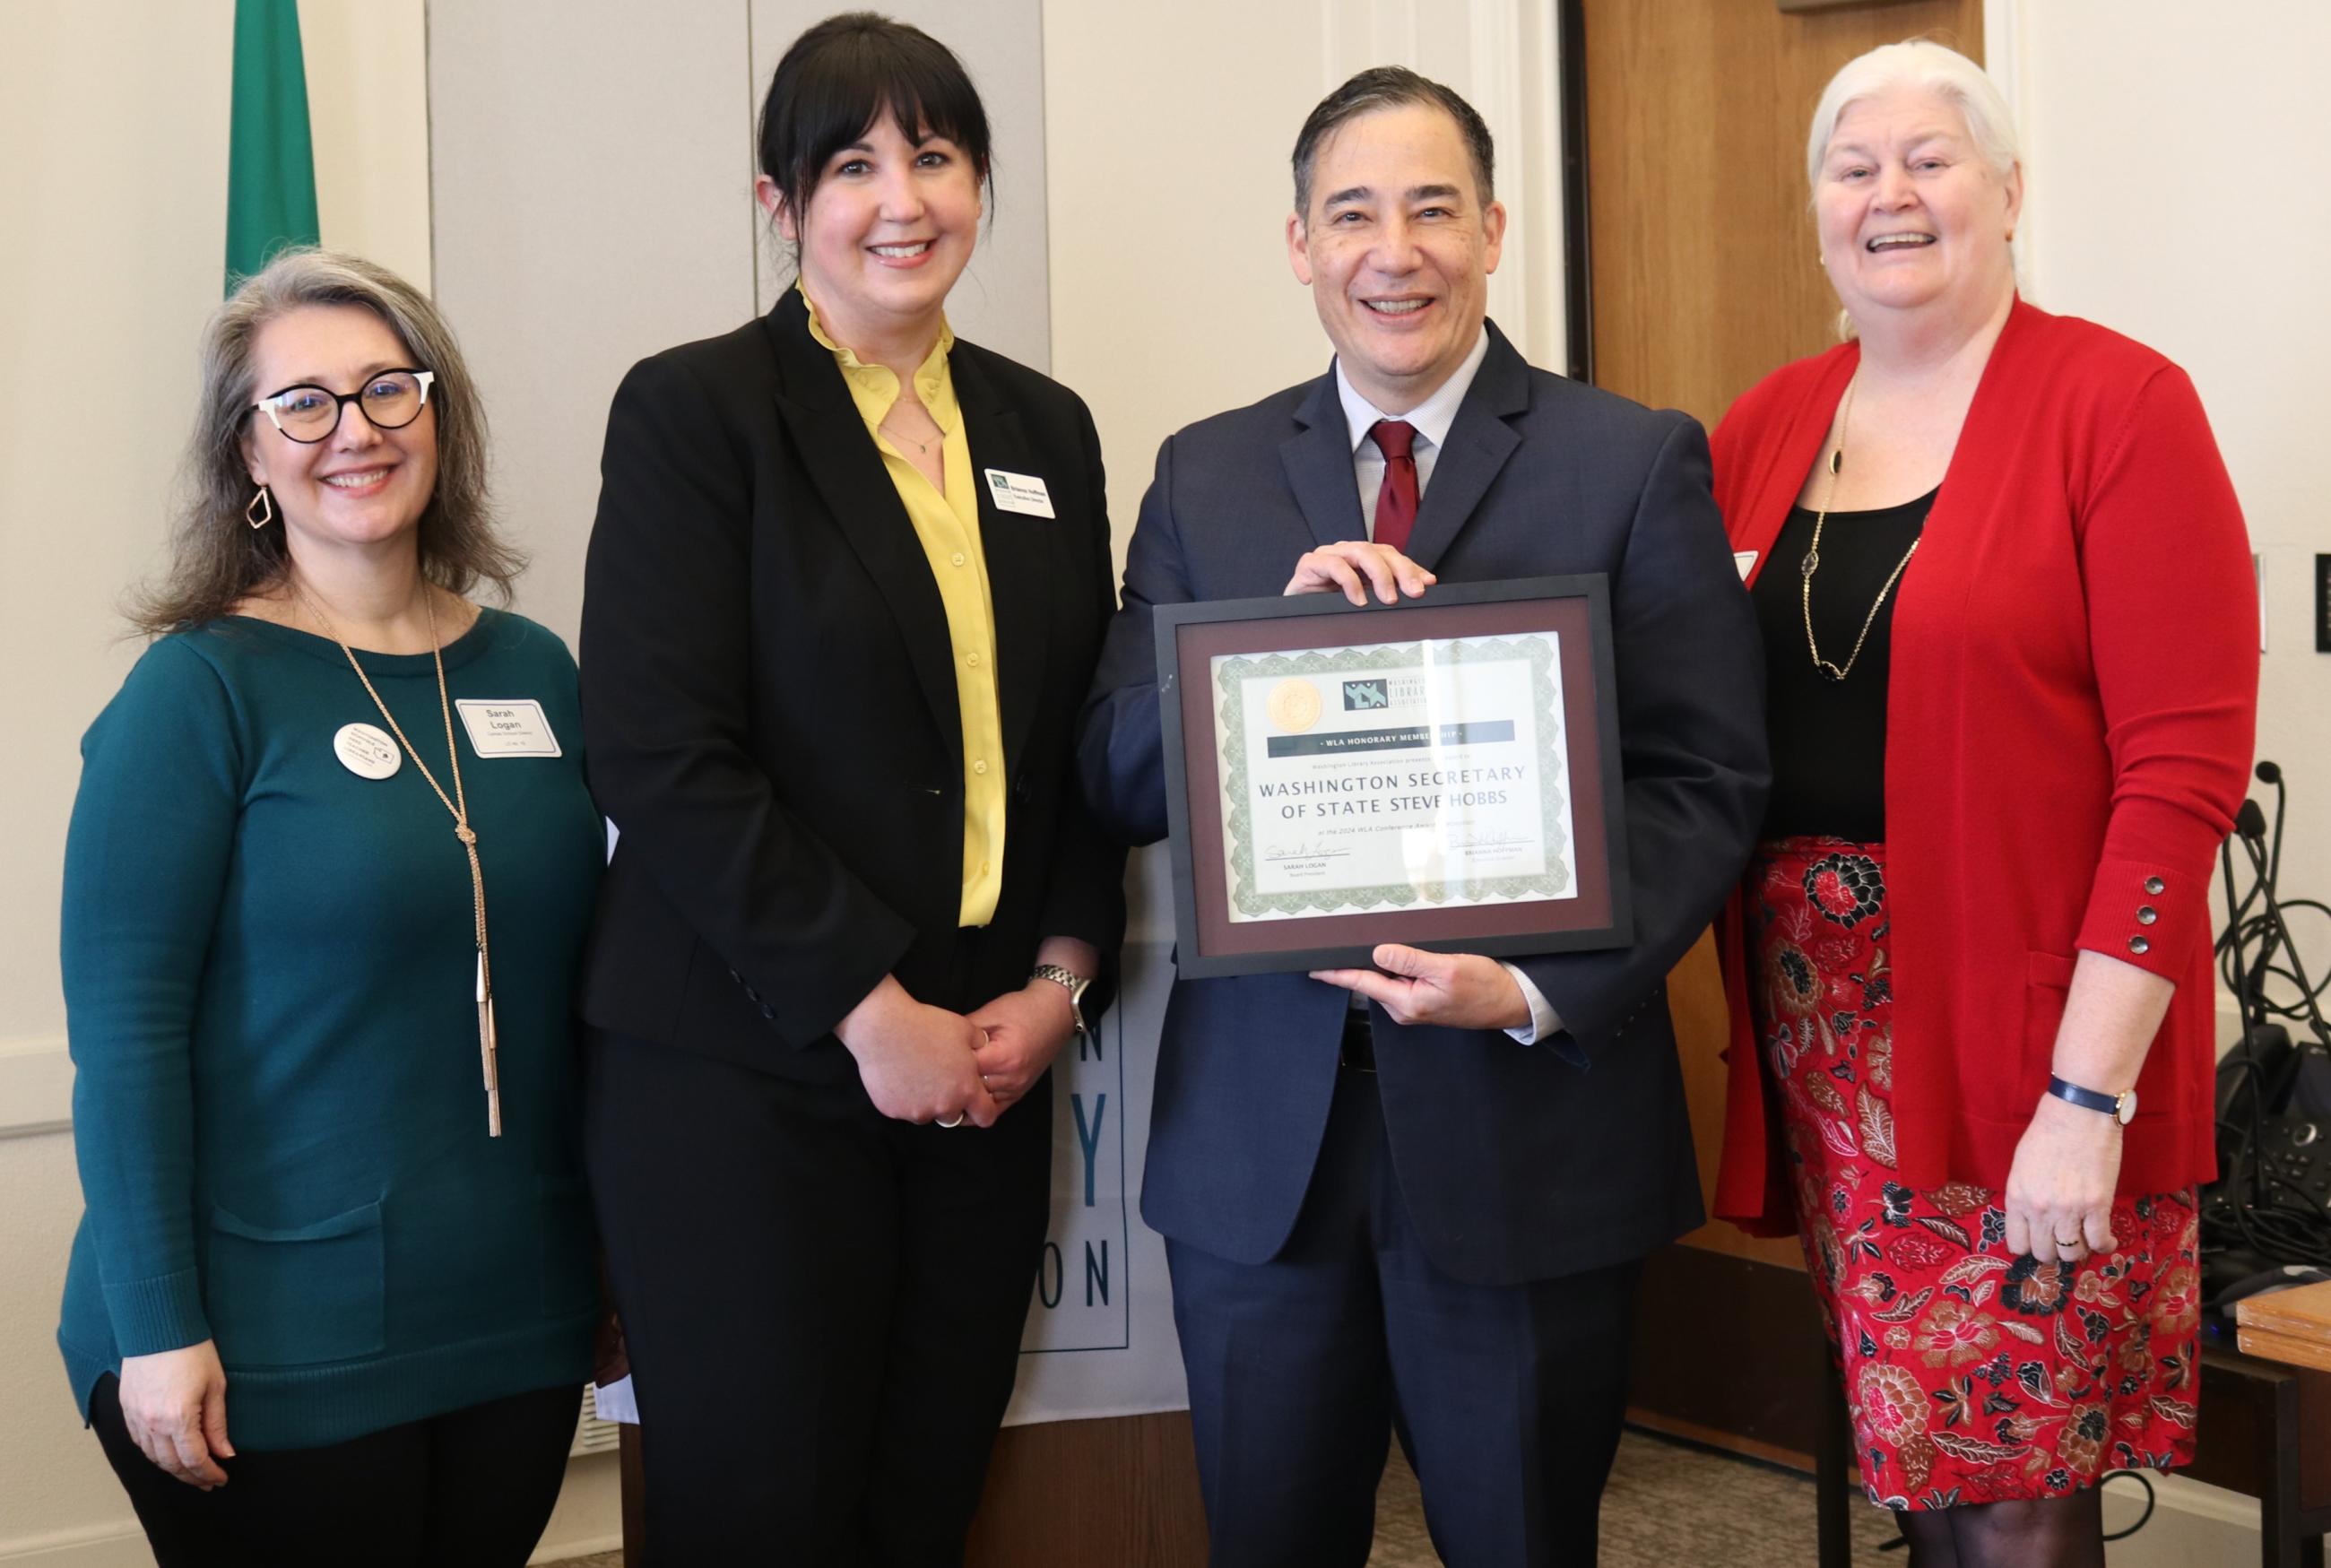 Secretary Hobbs and Washington State Librarian Sara Jones stand together after Secretary received the Washington Library Association's Honorary Membership Award for his advocacy of libraries across the state.